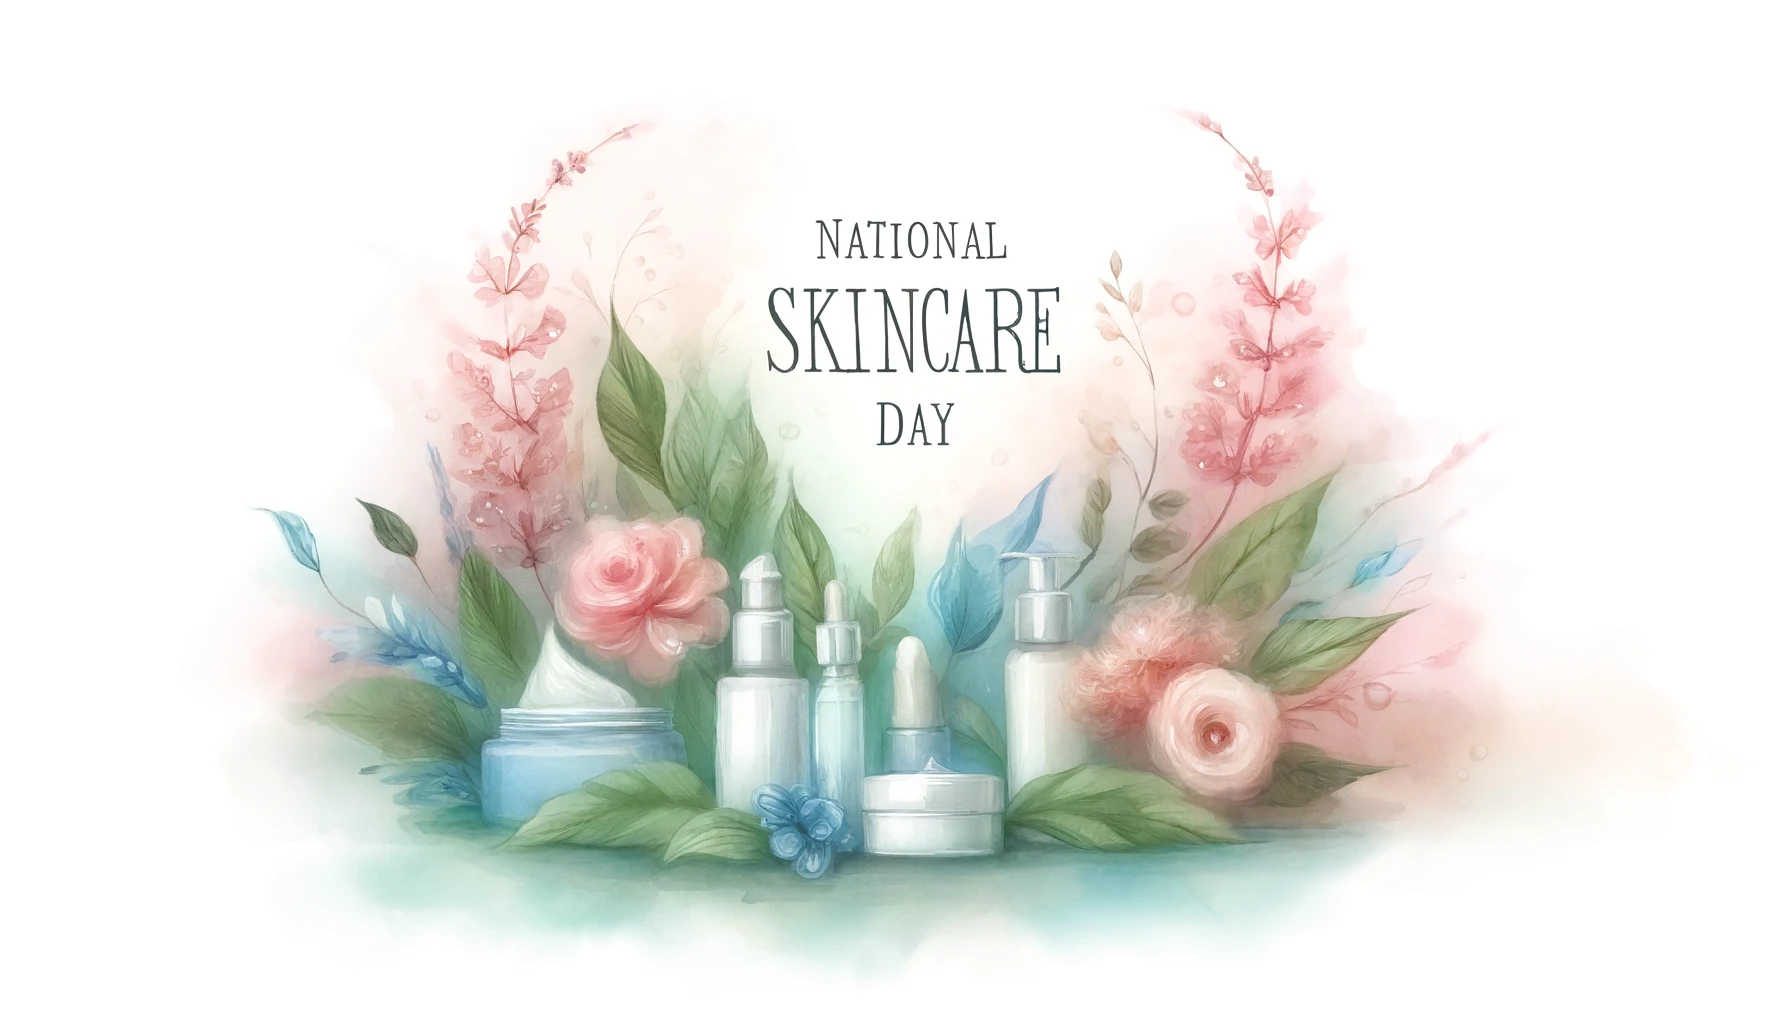 Loving Skincare Day Messages for Beauty Enthusiasts